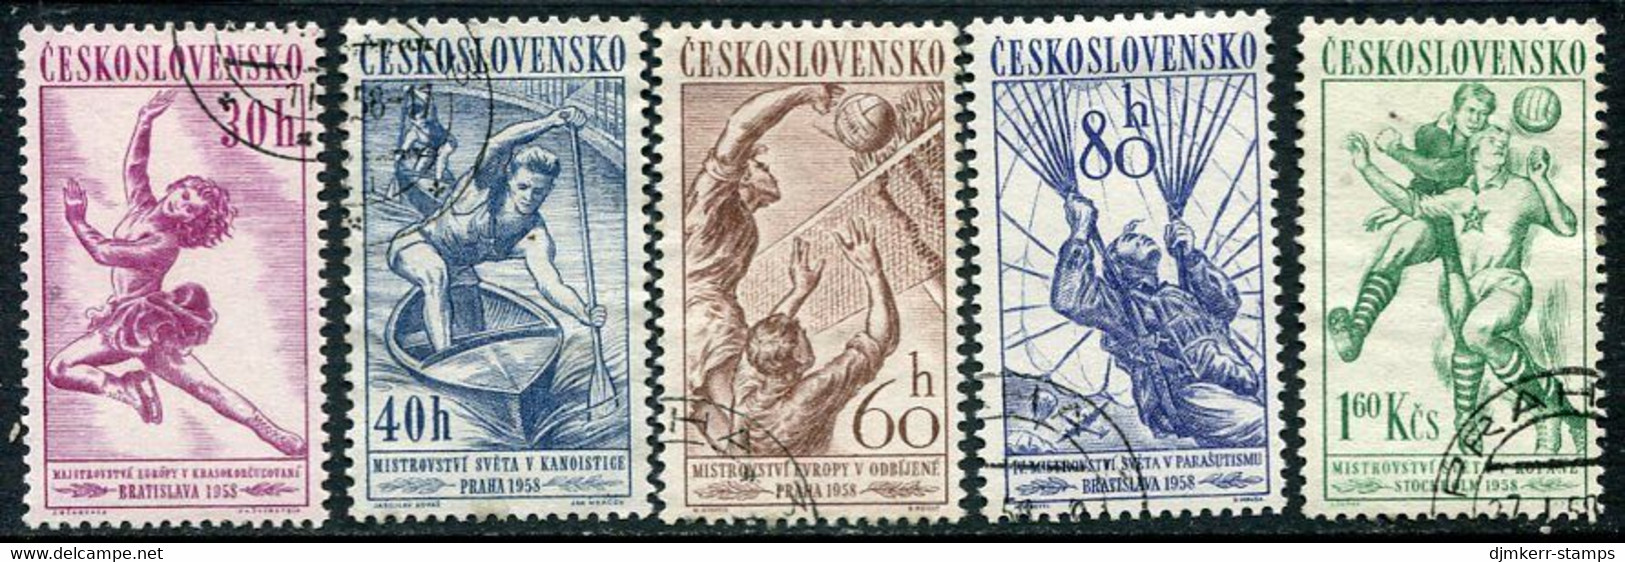 CZECHOSLOVAKIA 1958 Sports Championships Used  Michel 1058-62 - Used Stamps